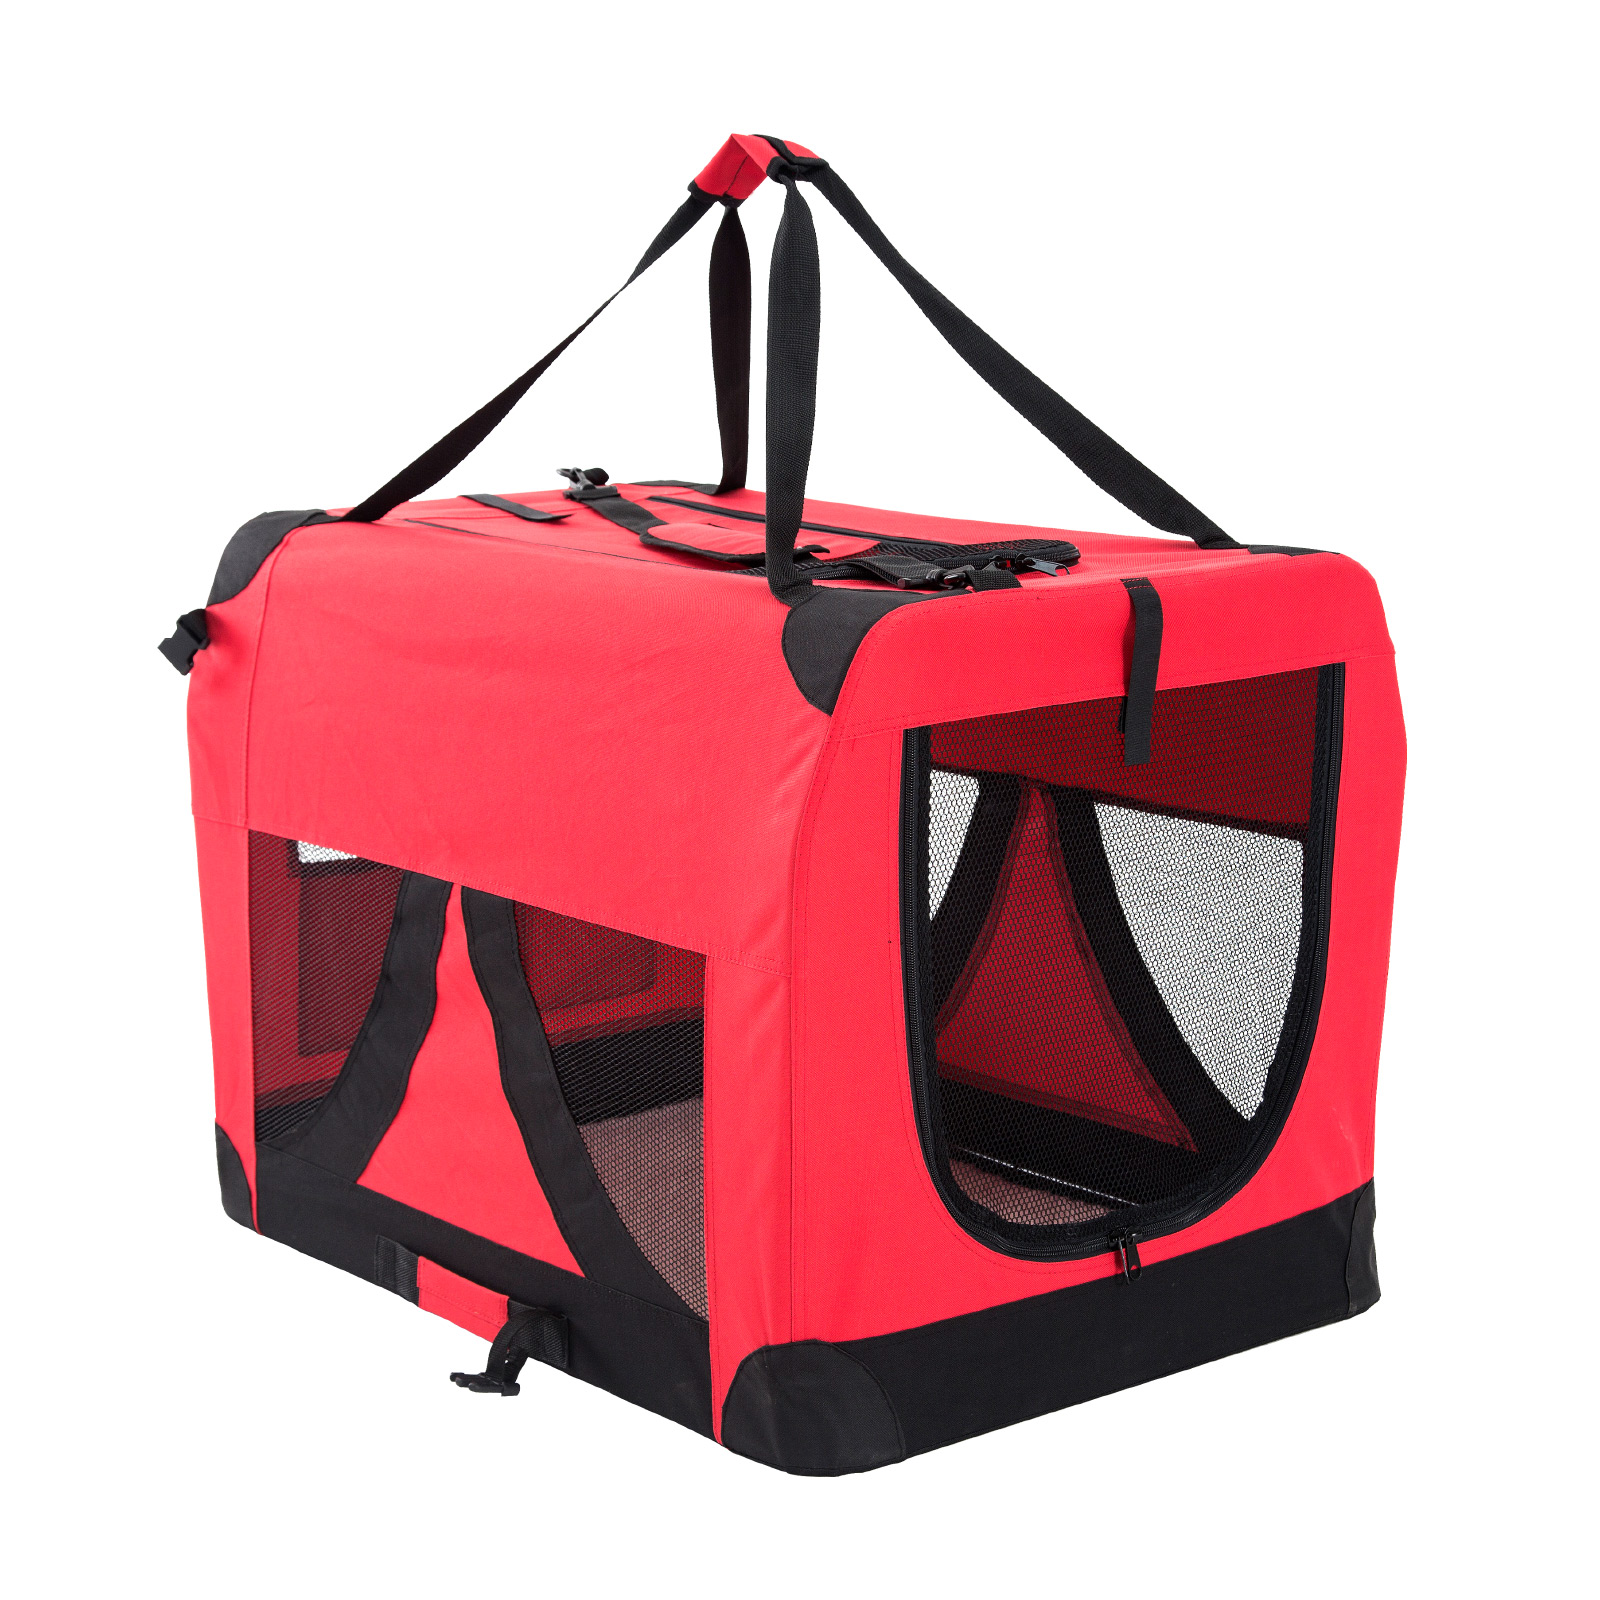 L Portable Soft Dog Crate - RED